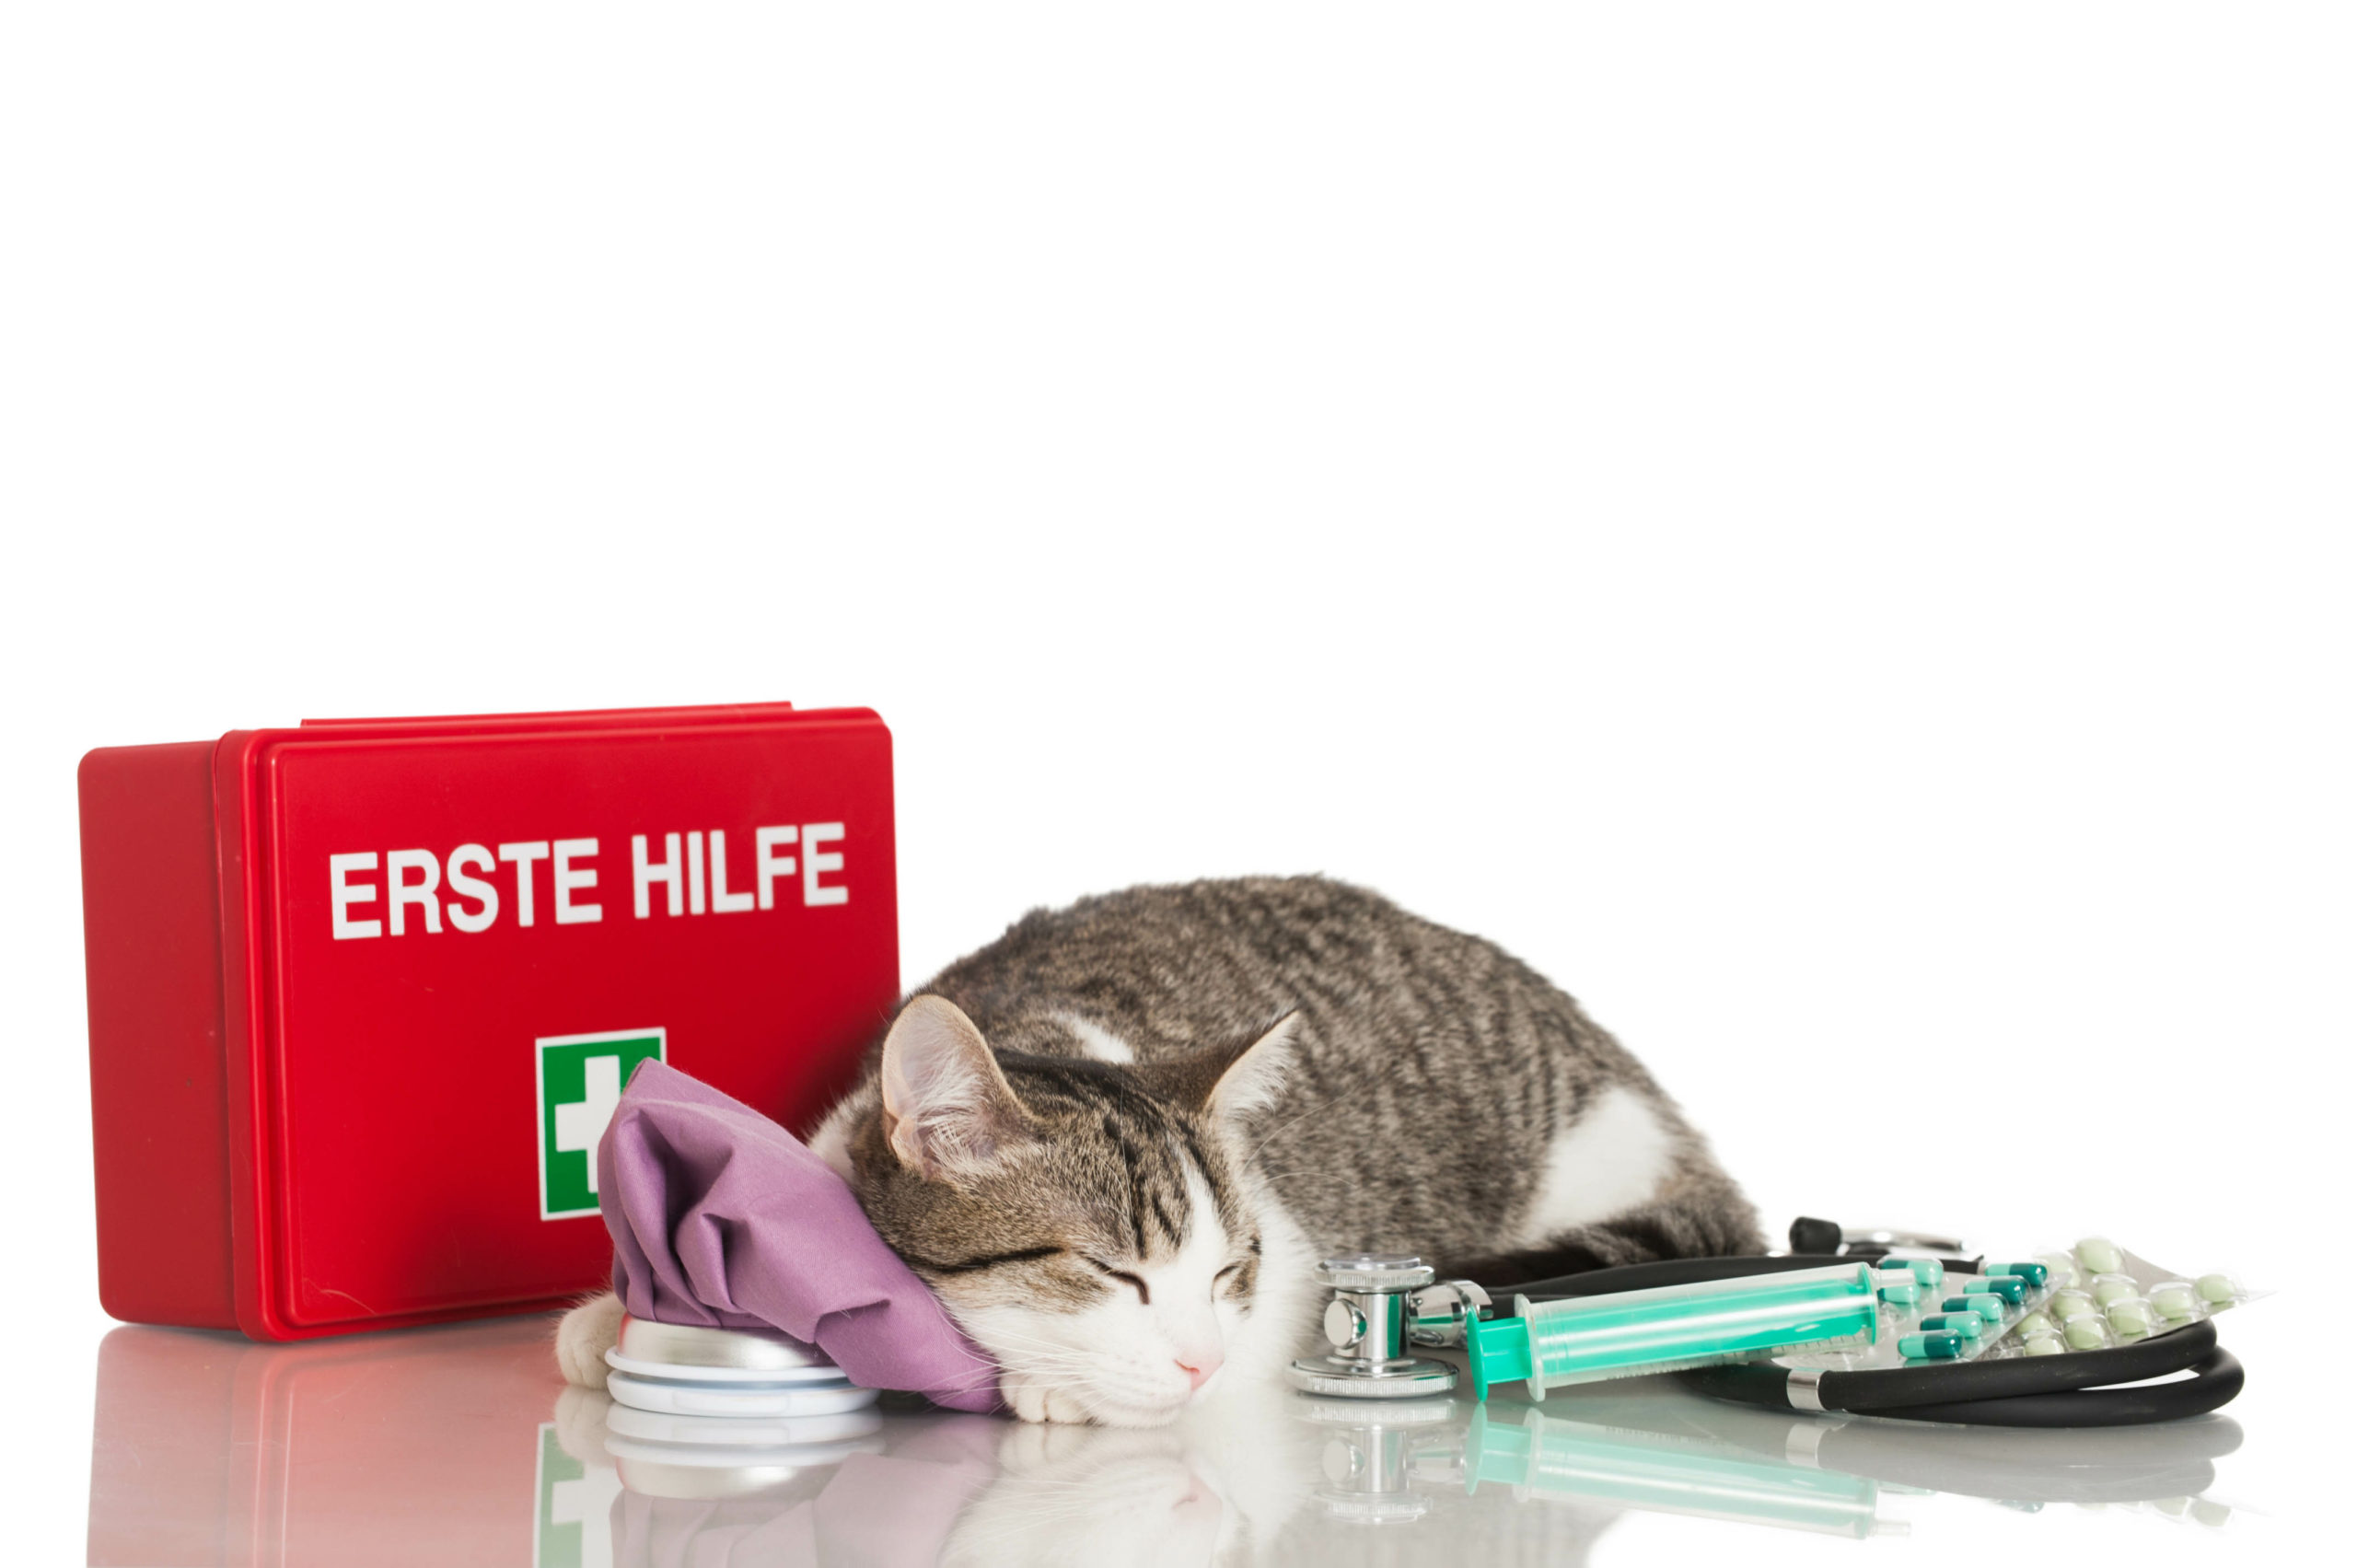 Learn Pet First Aid To Help Your Cat in Emergencies